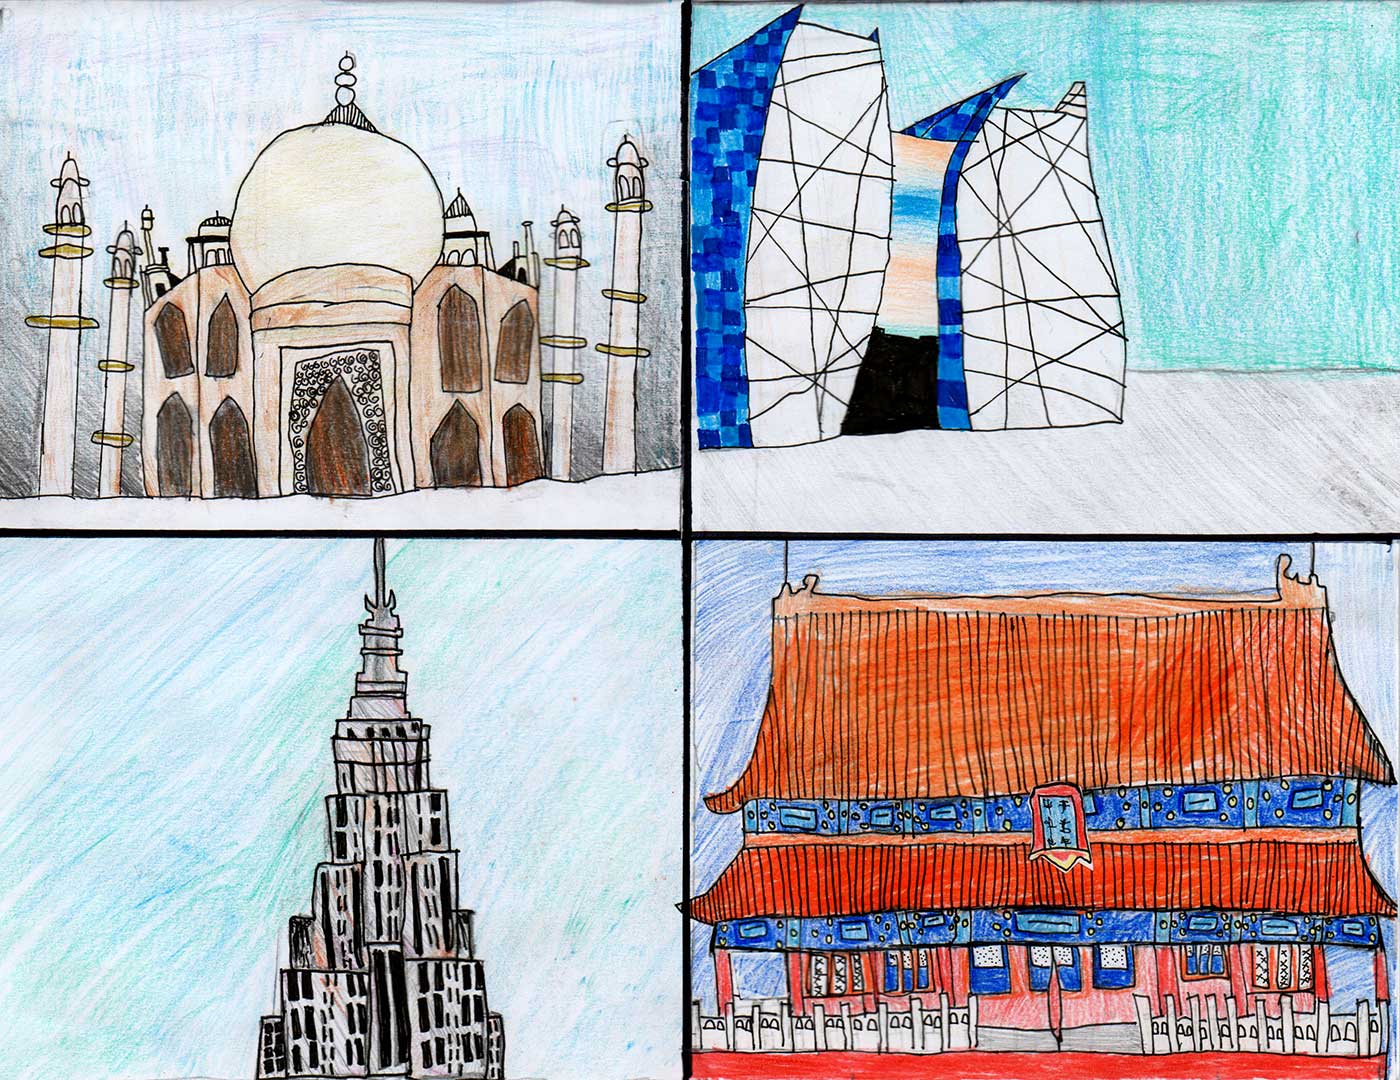 drawing depicting architecture from across the world.